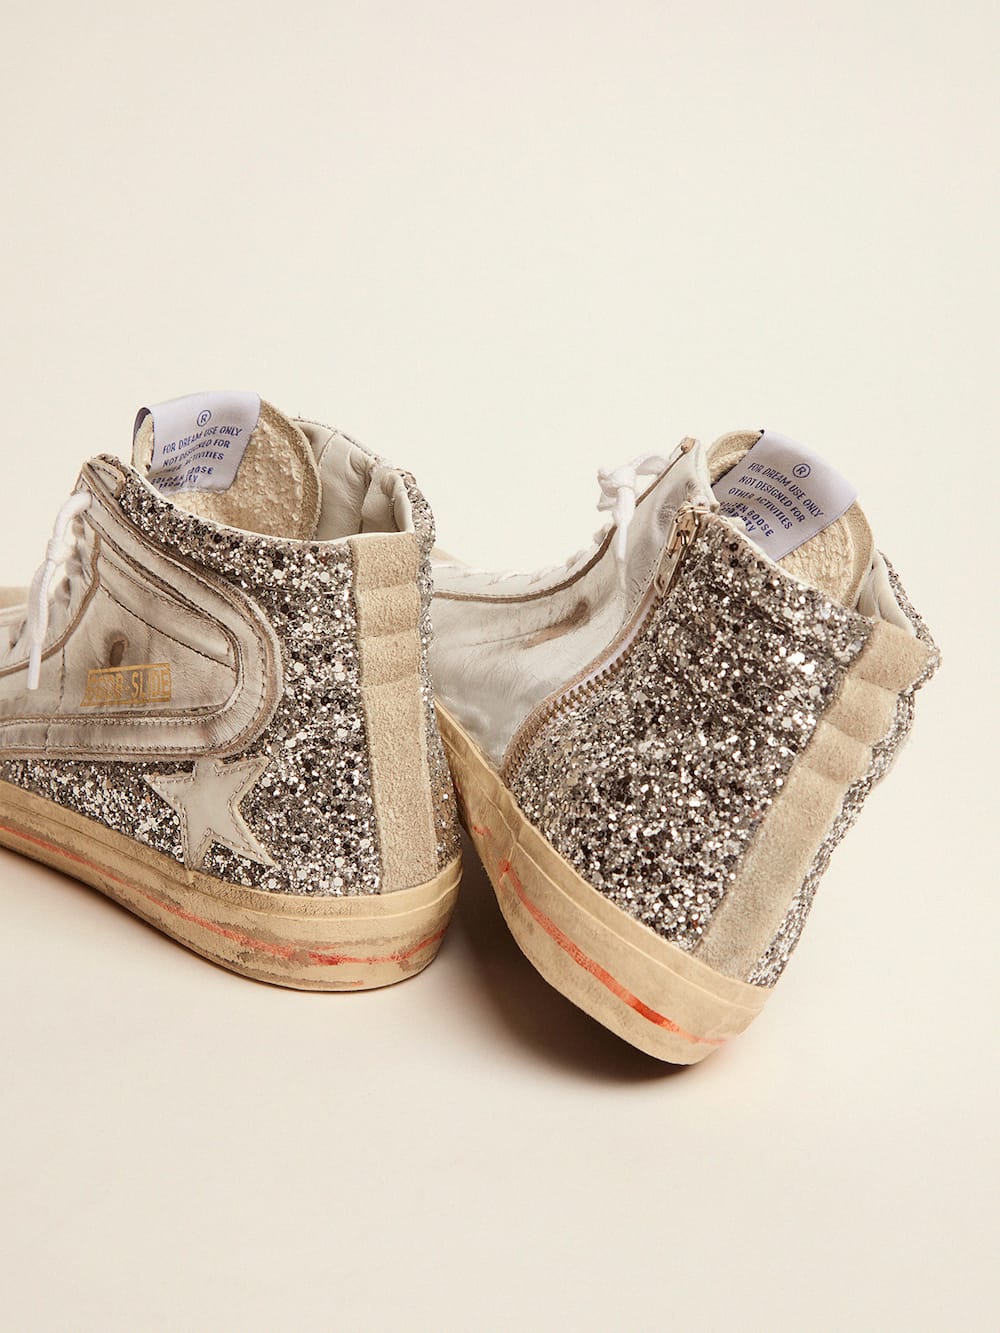 Golden Goose - Women's Slide with laminated leather upper and silver glitter in 